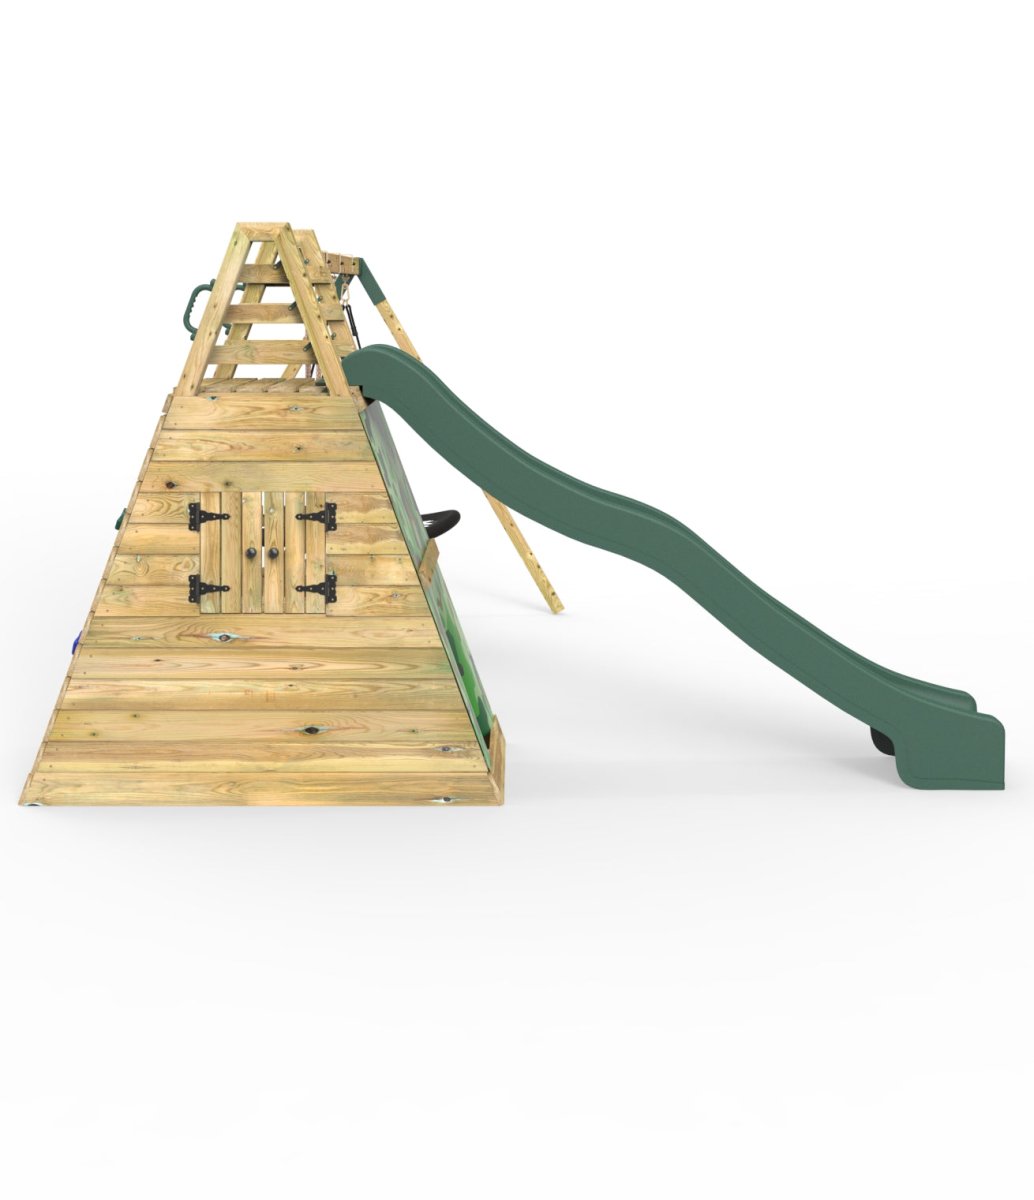 Rebo Wooden Pyramid Activity Frame with Swings & 10ft Water Slide - Rainbow